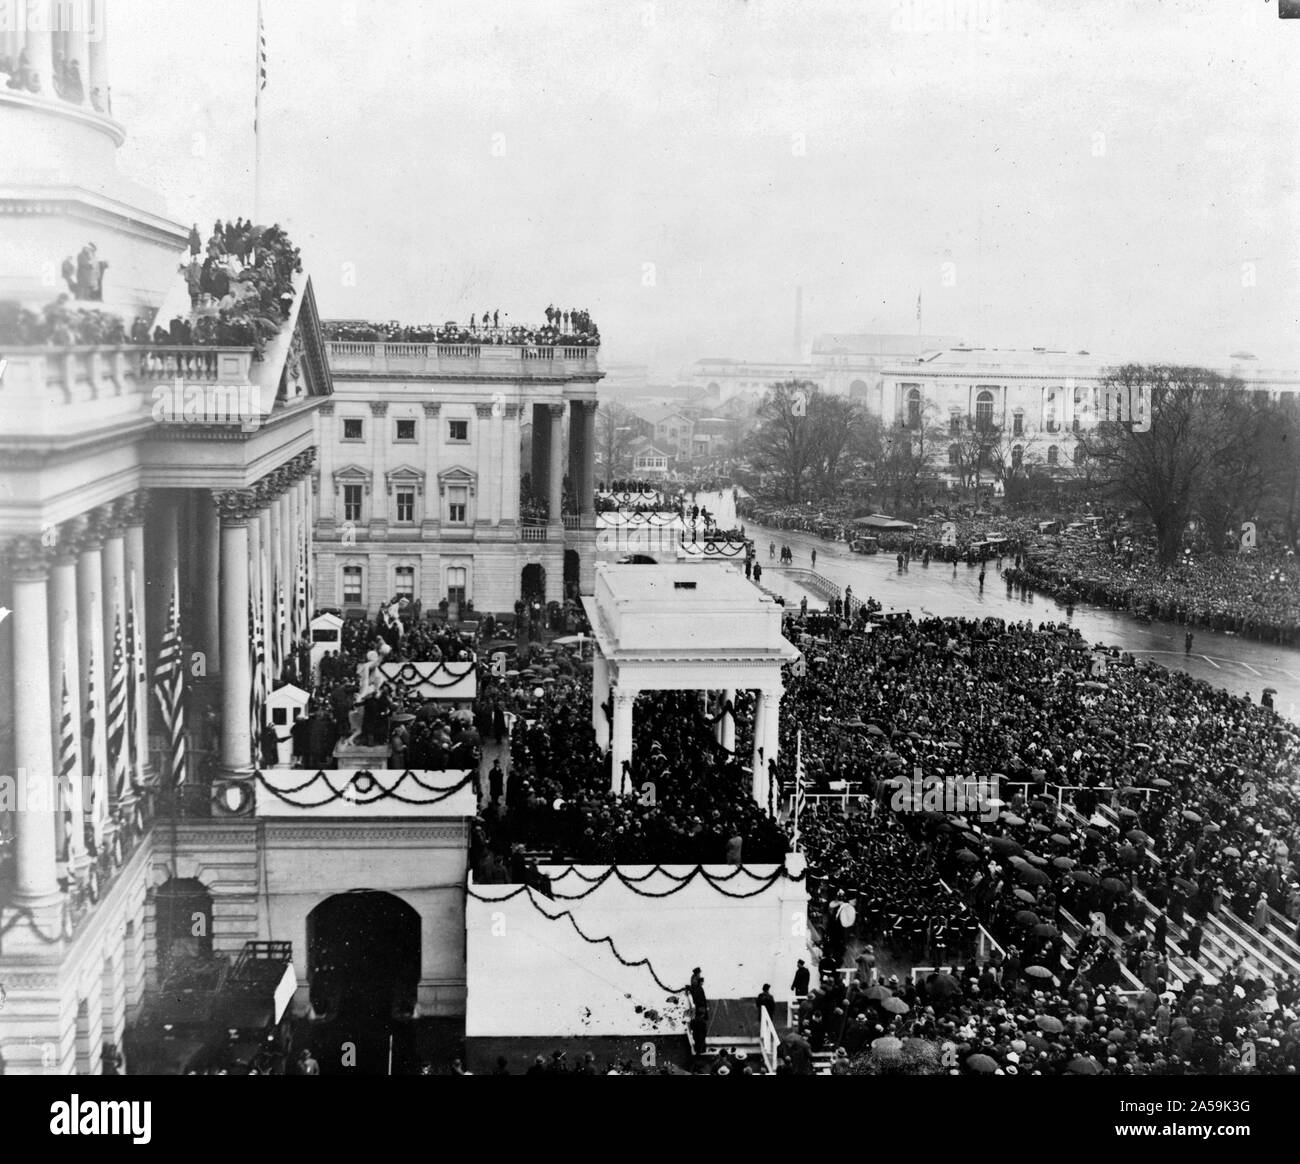 President Hoover's inauguration, March 4, 1929 Stock Photo